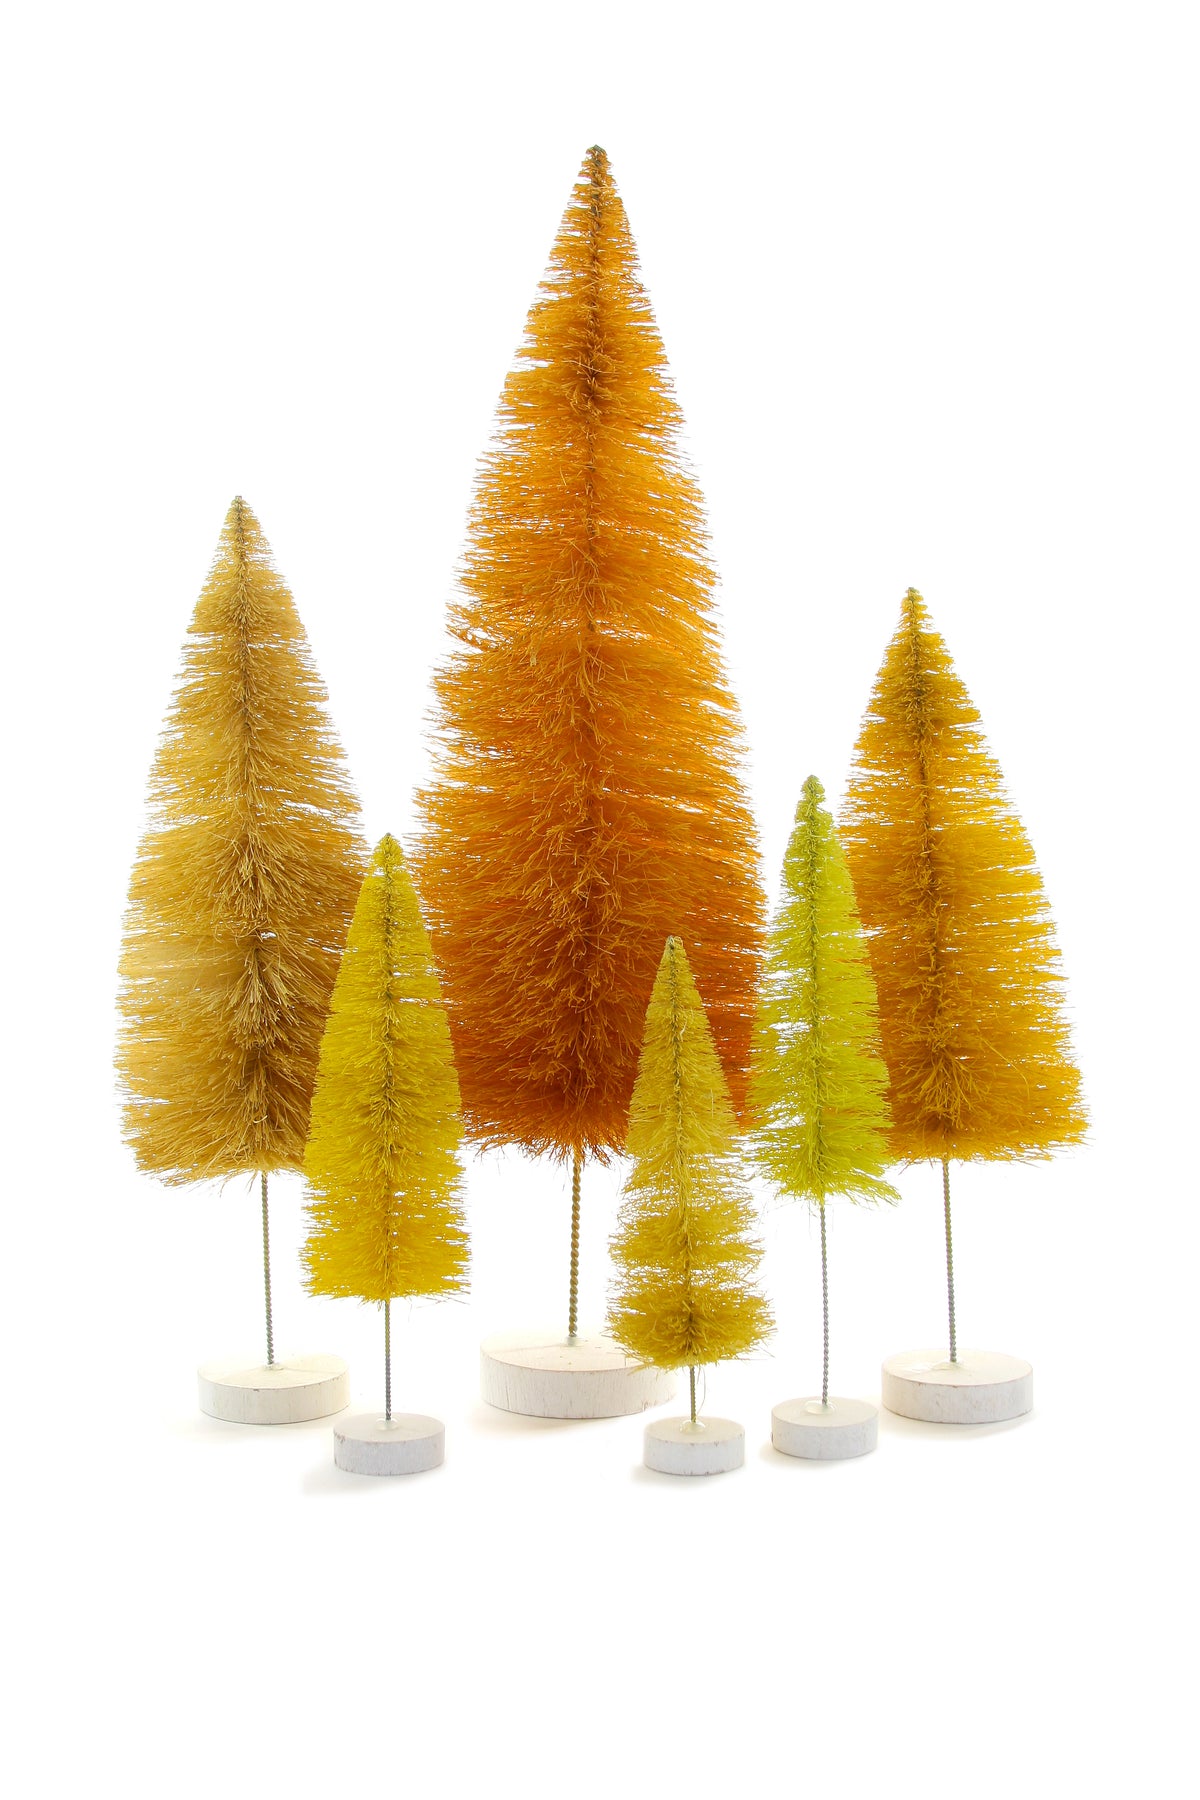 Shop Rainbow Trees Set of 6 in Various Colors | Burke Decor